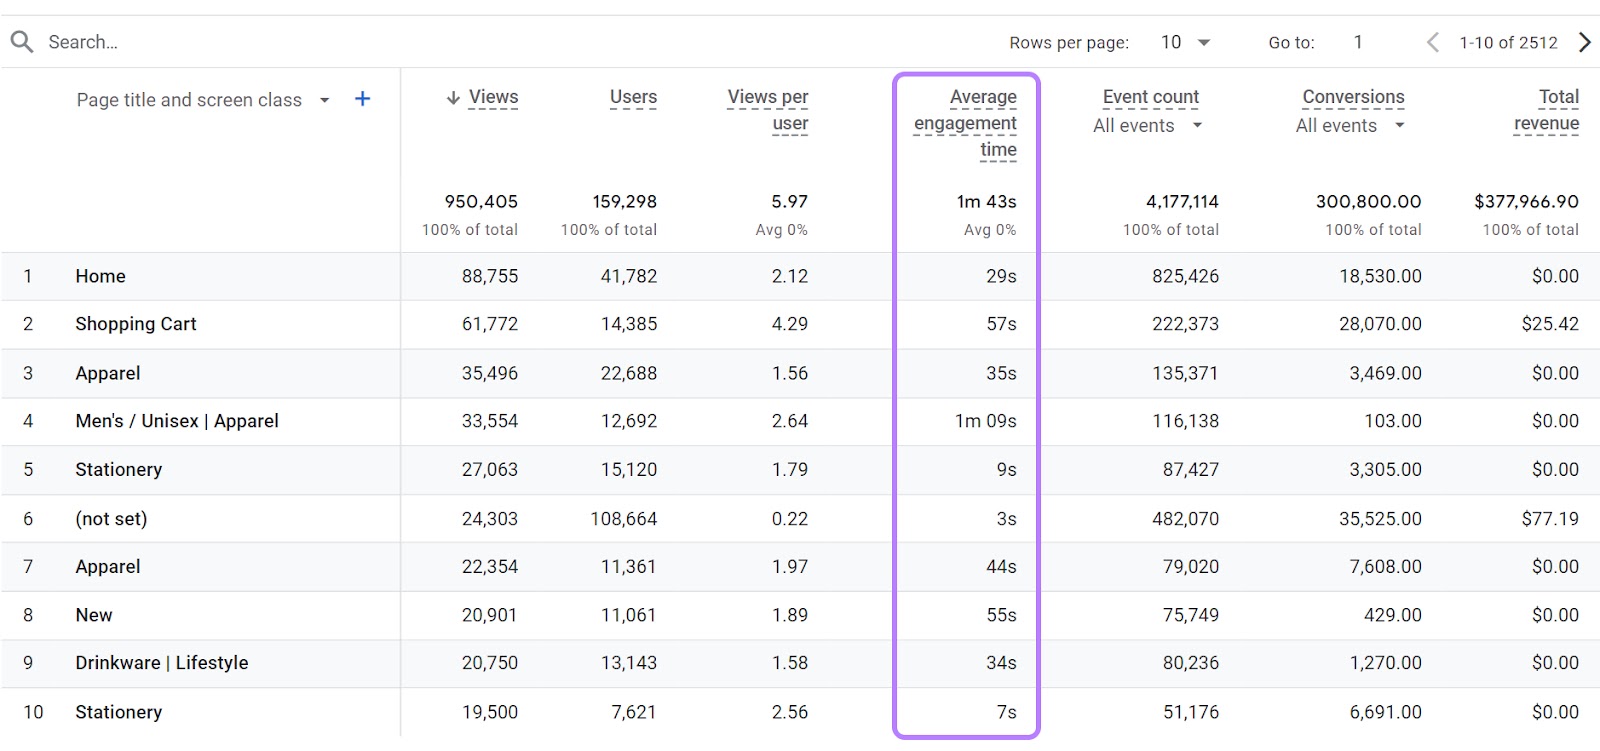 “Average engagement time” column highlighted in the table showing the website pages